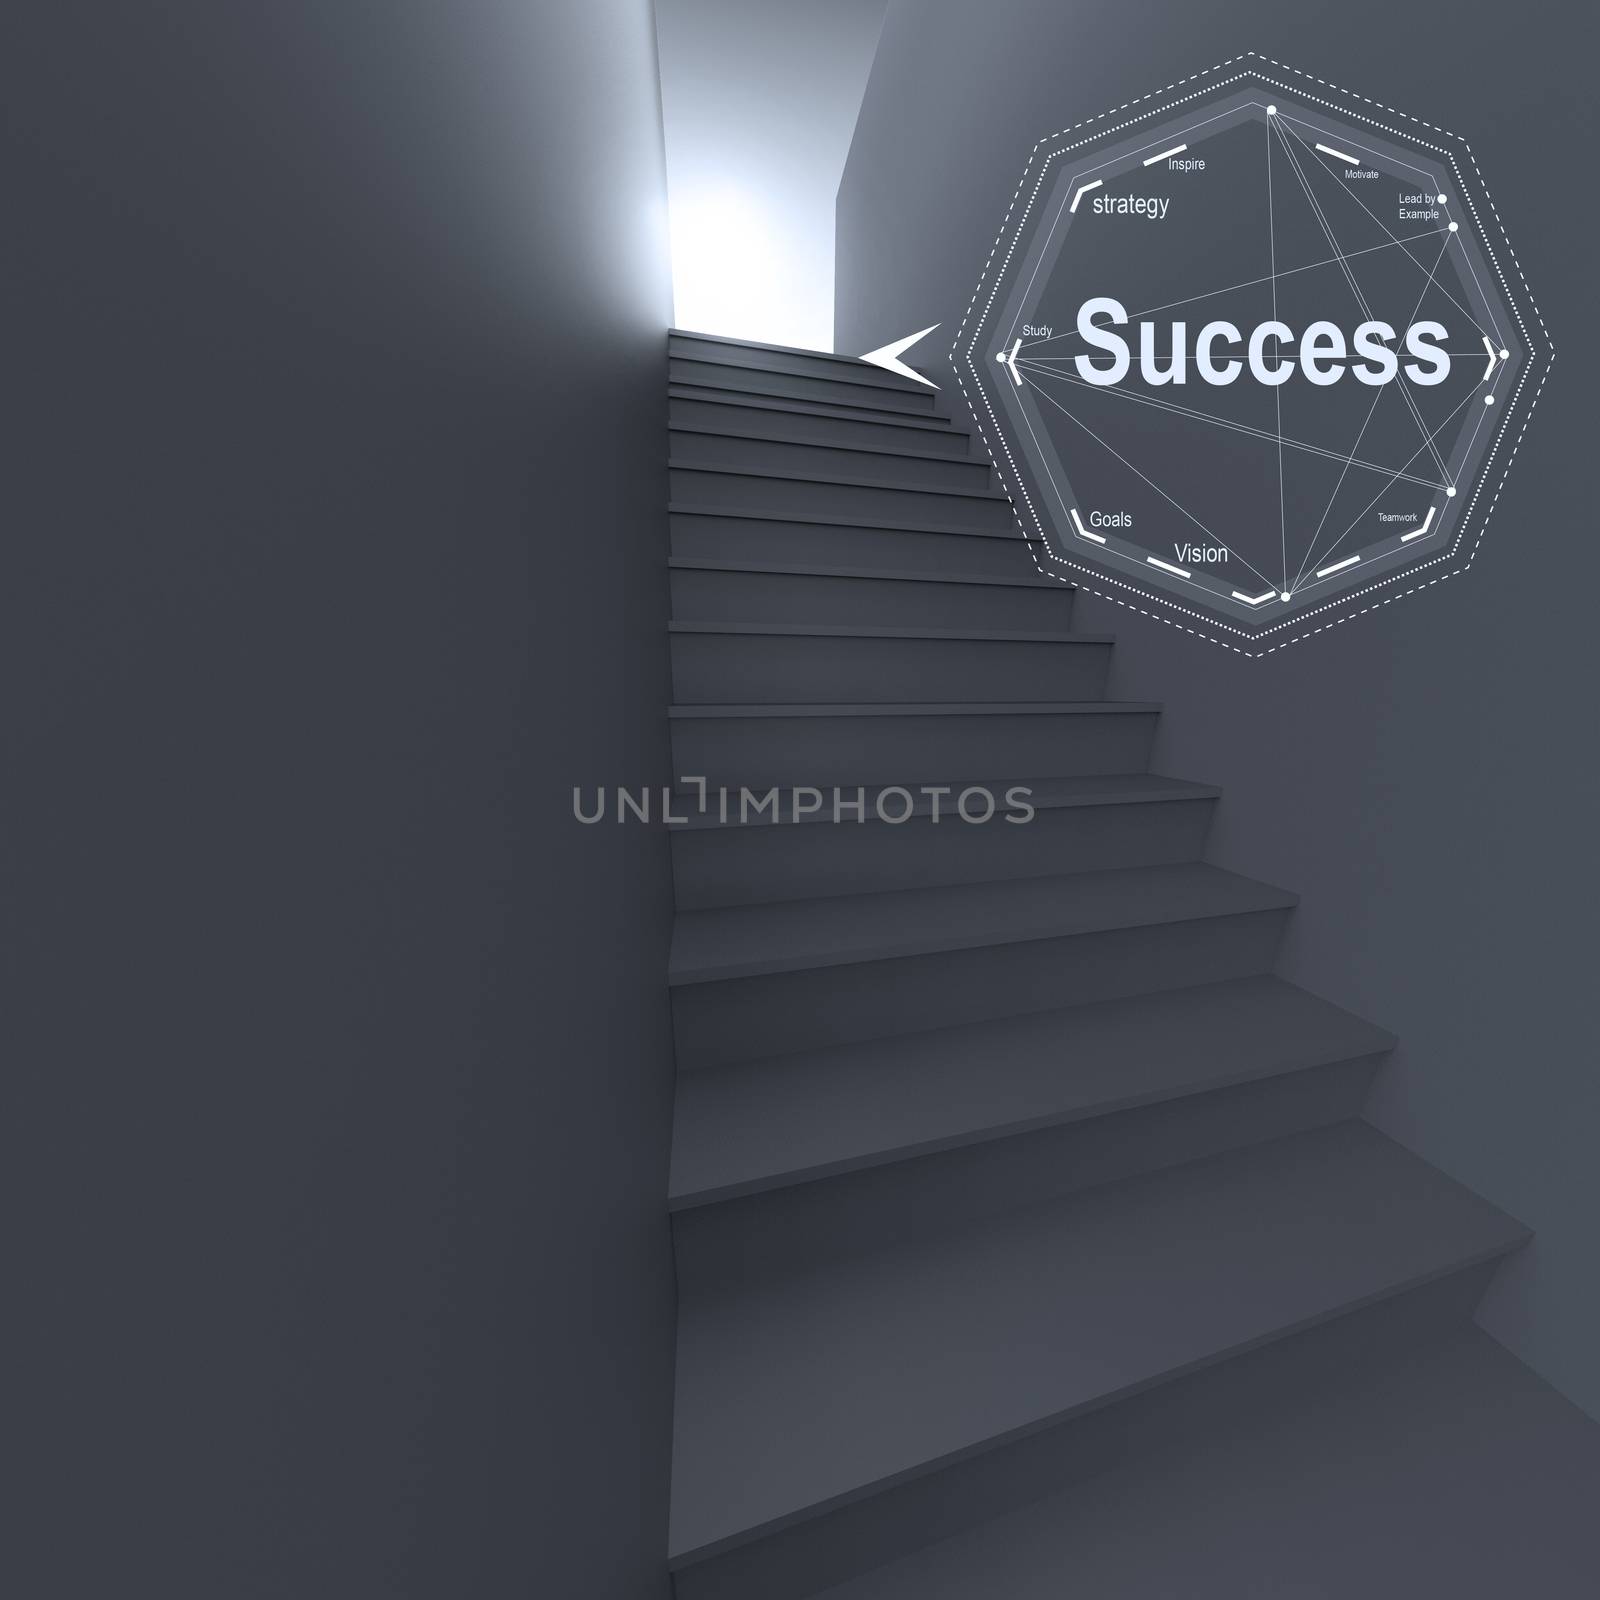 3d stairway to success as business concept